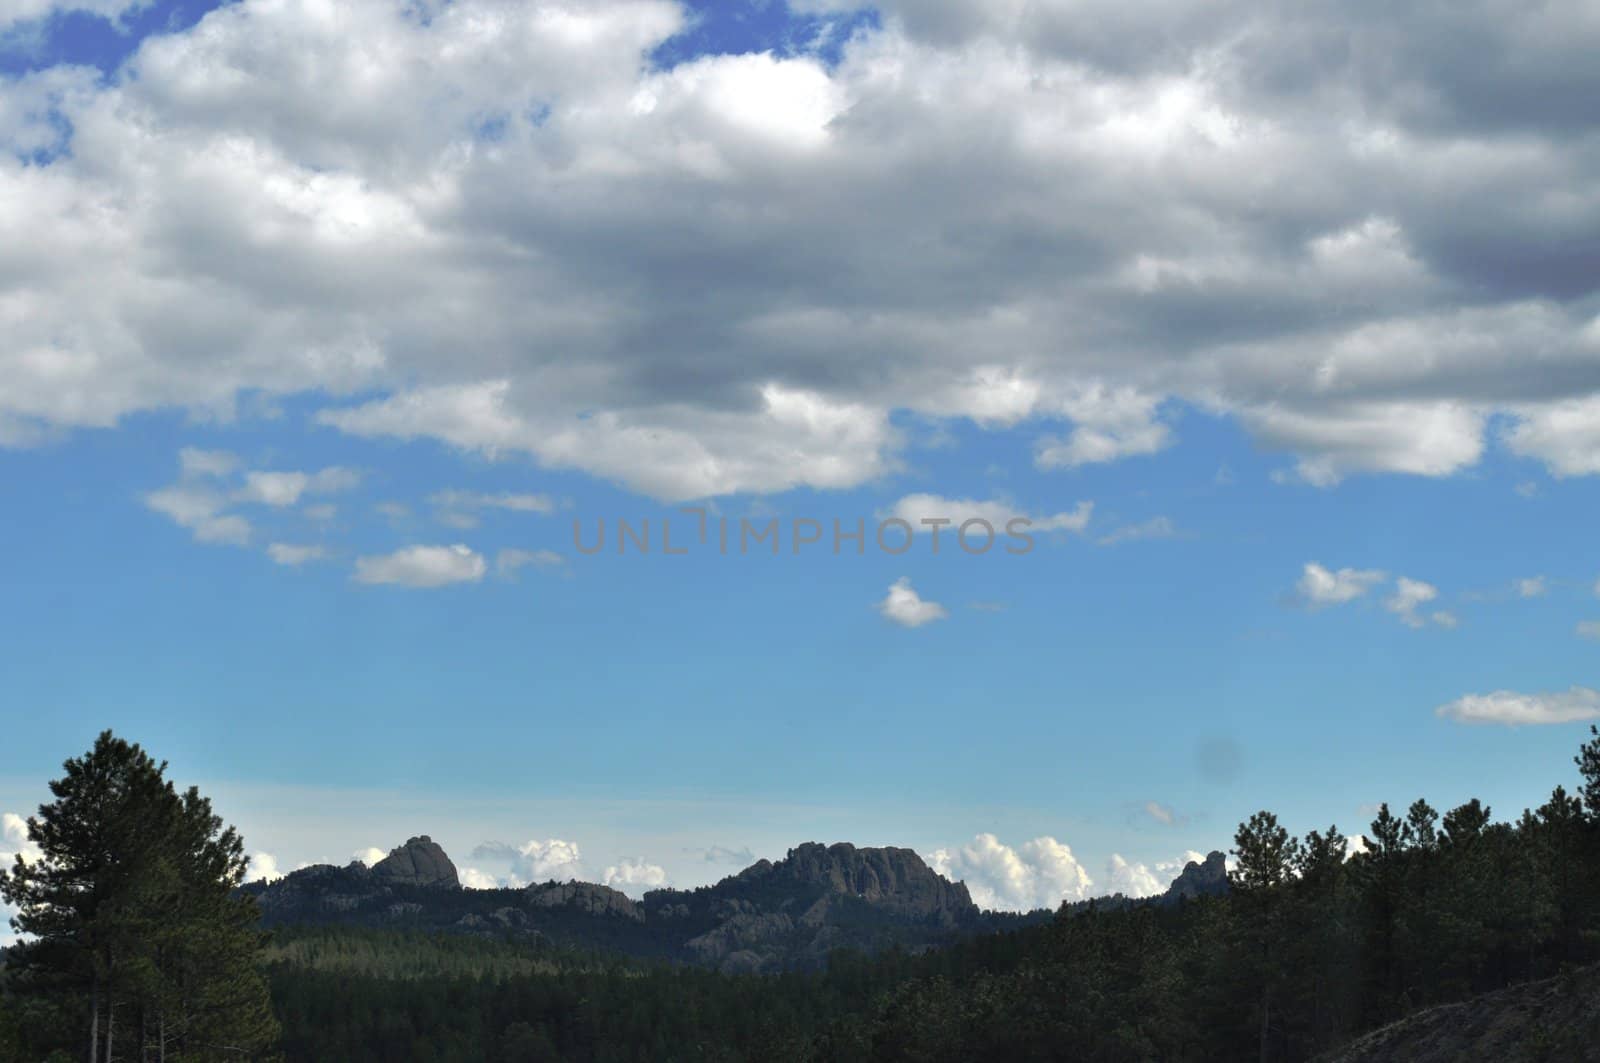 Black hills and sky background by RefocusPhoto